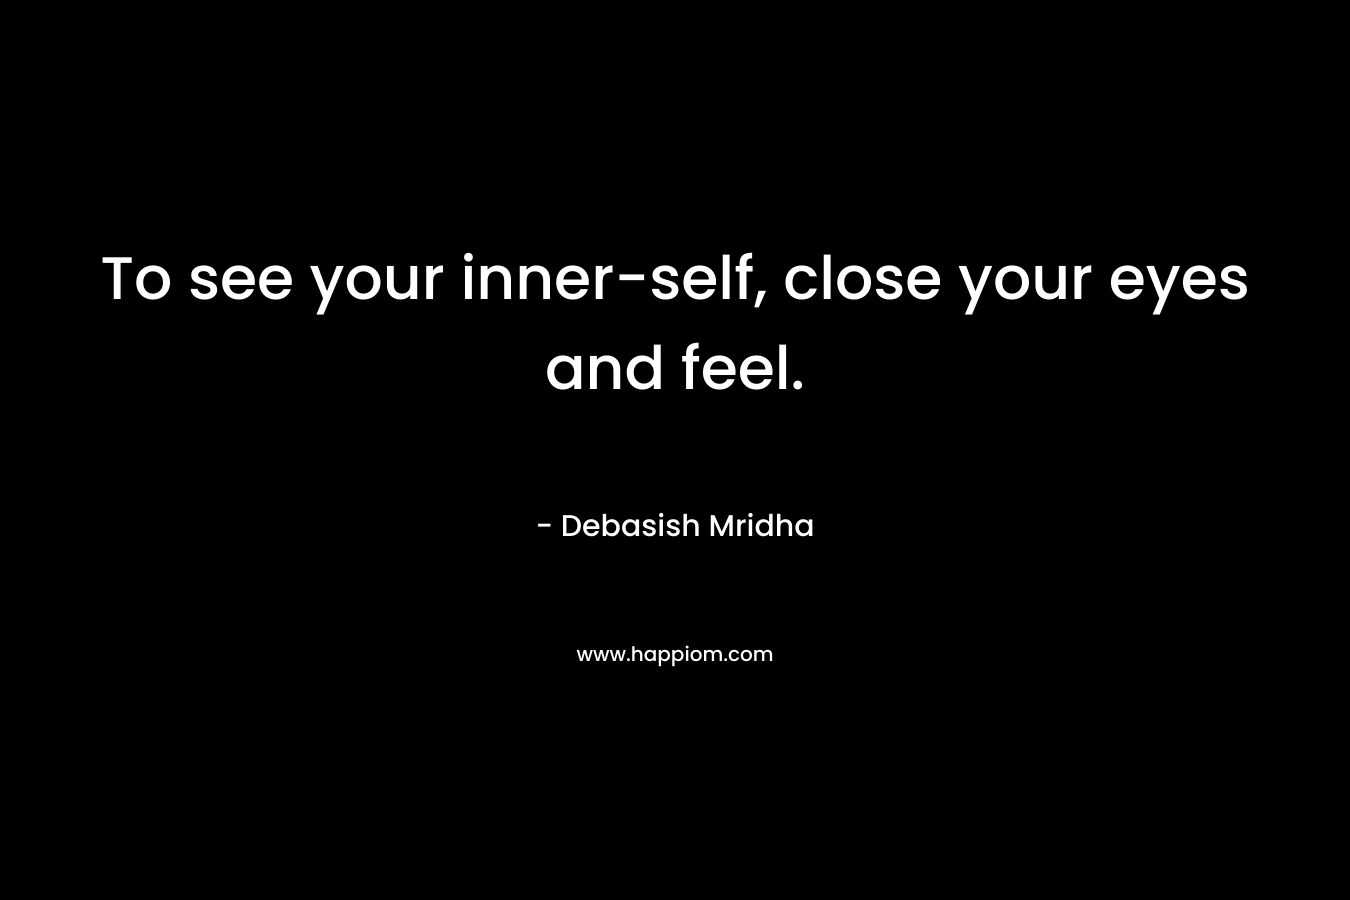 To see your inner-self, close your eyes and feel. – Debasish Mridha